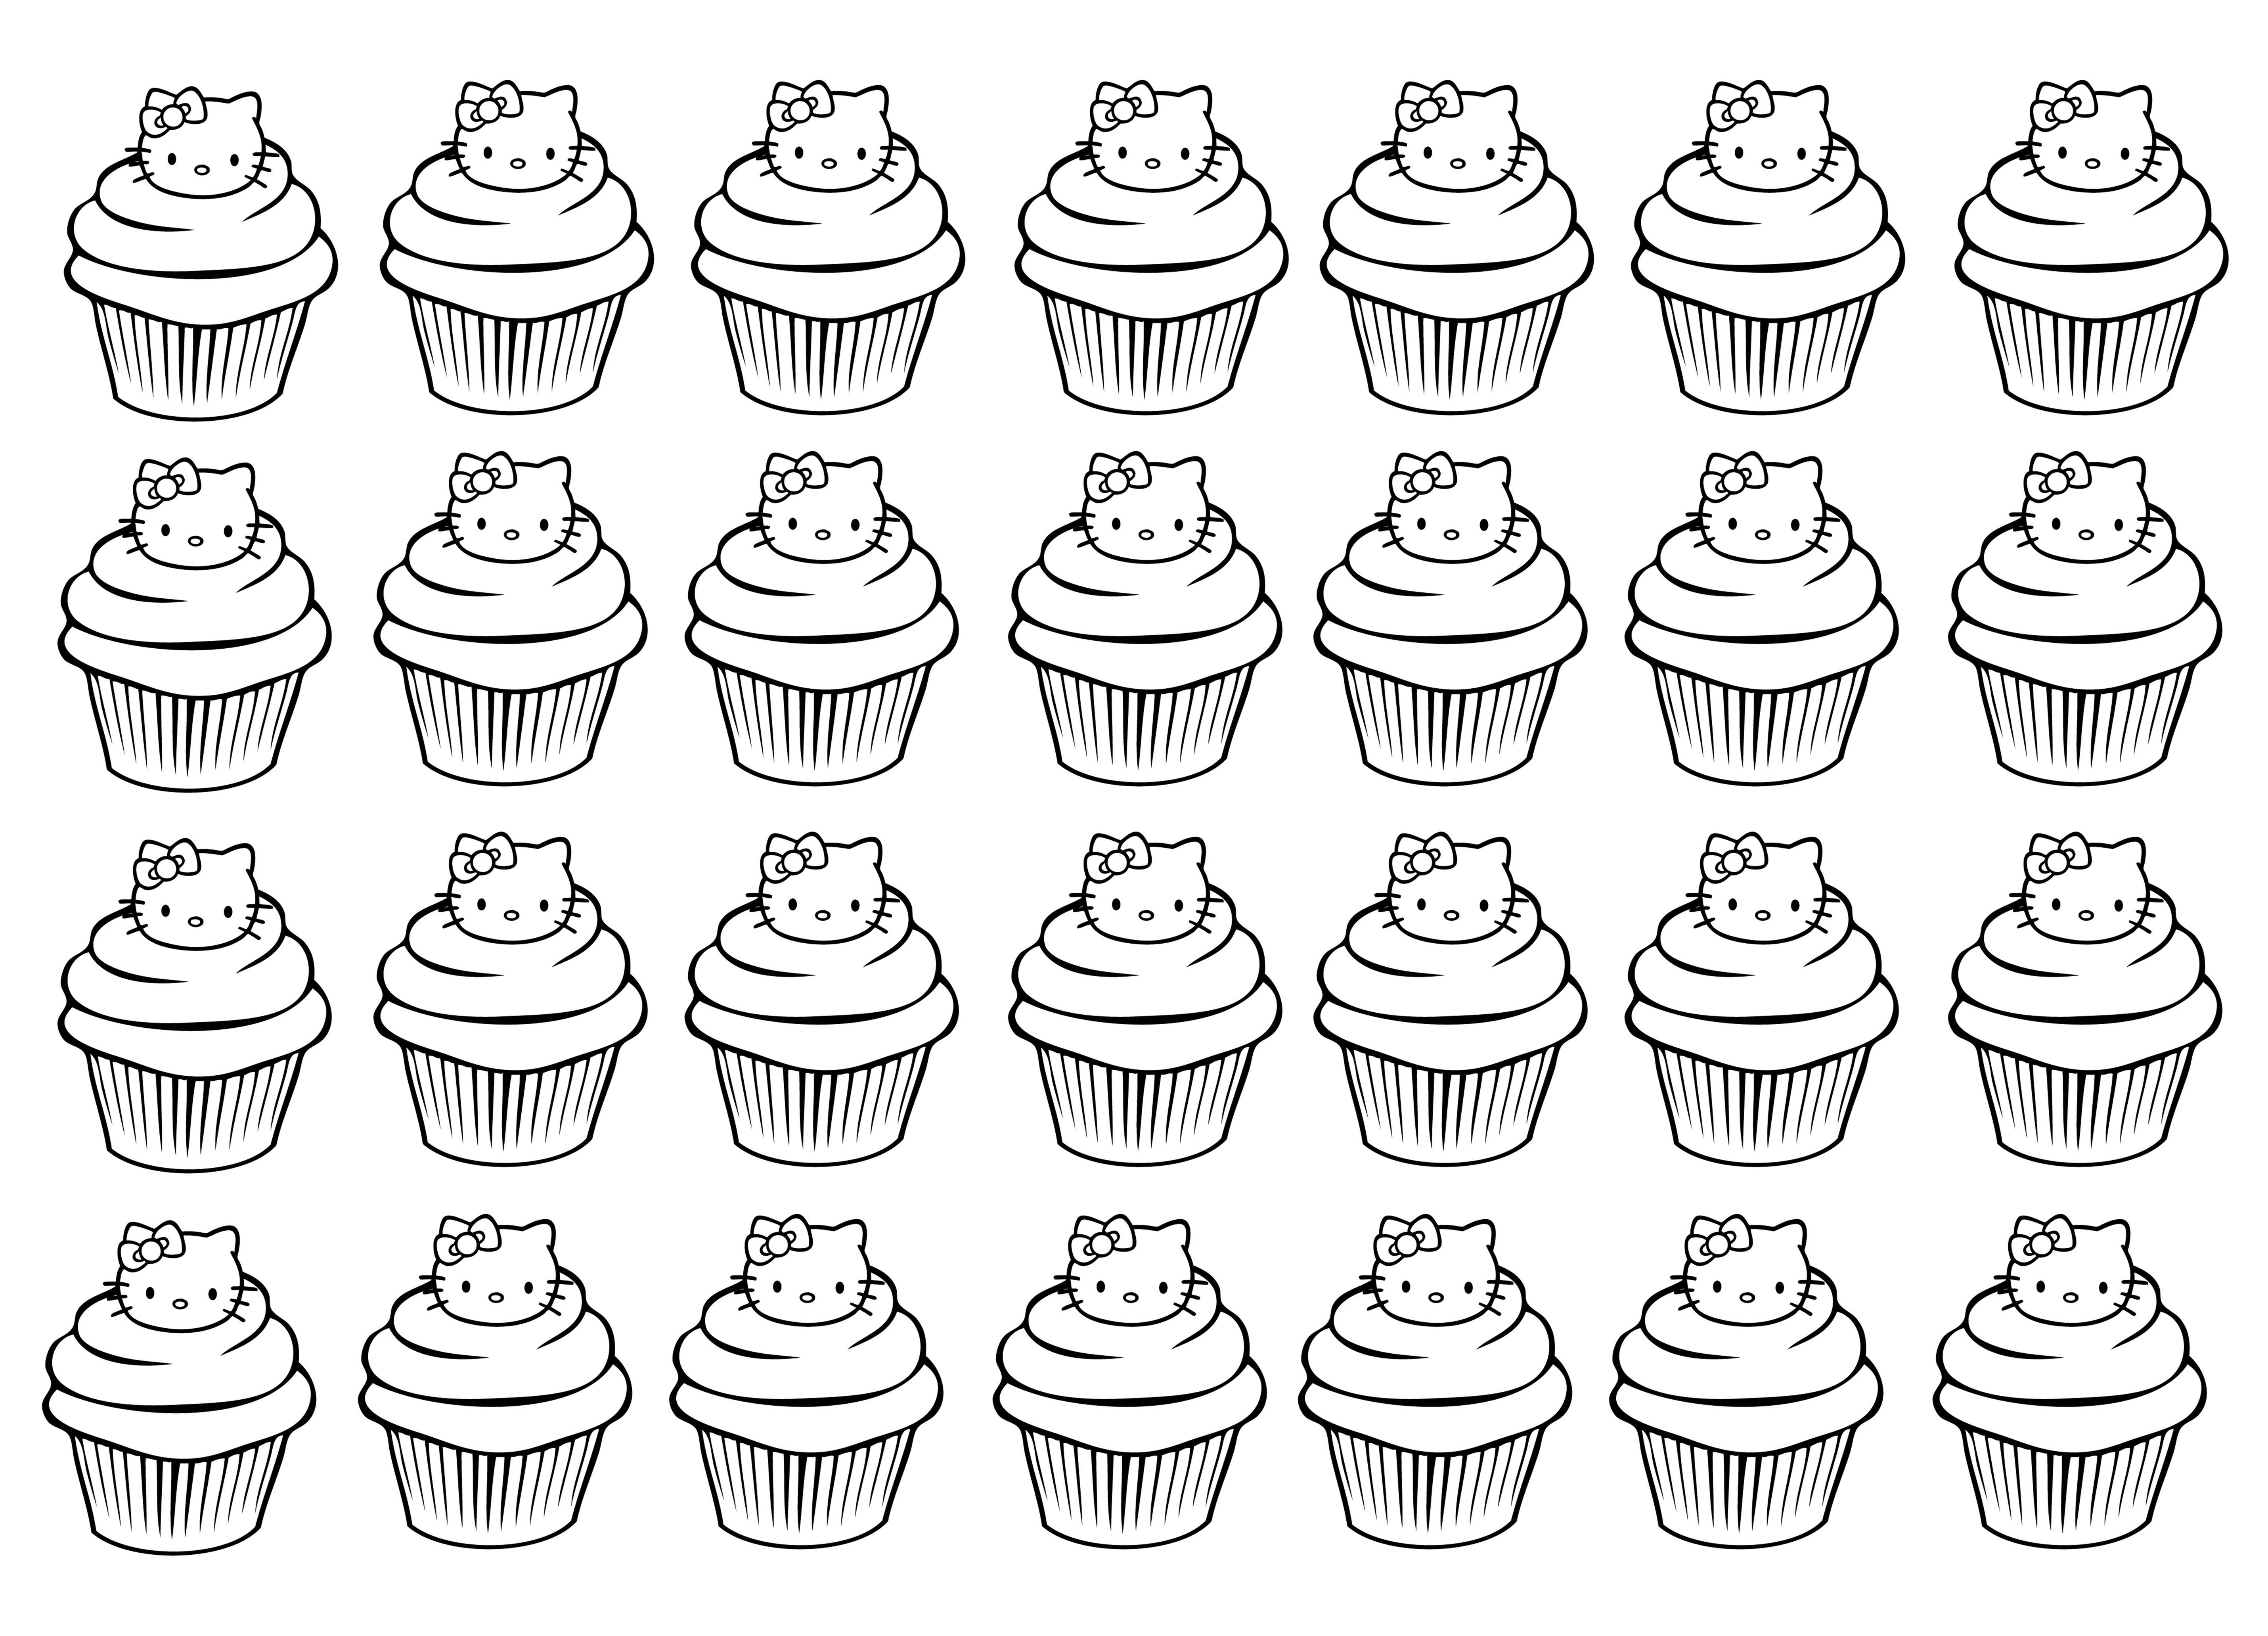 Many Hello Kitty cupcakes to print and color